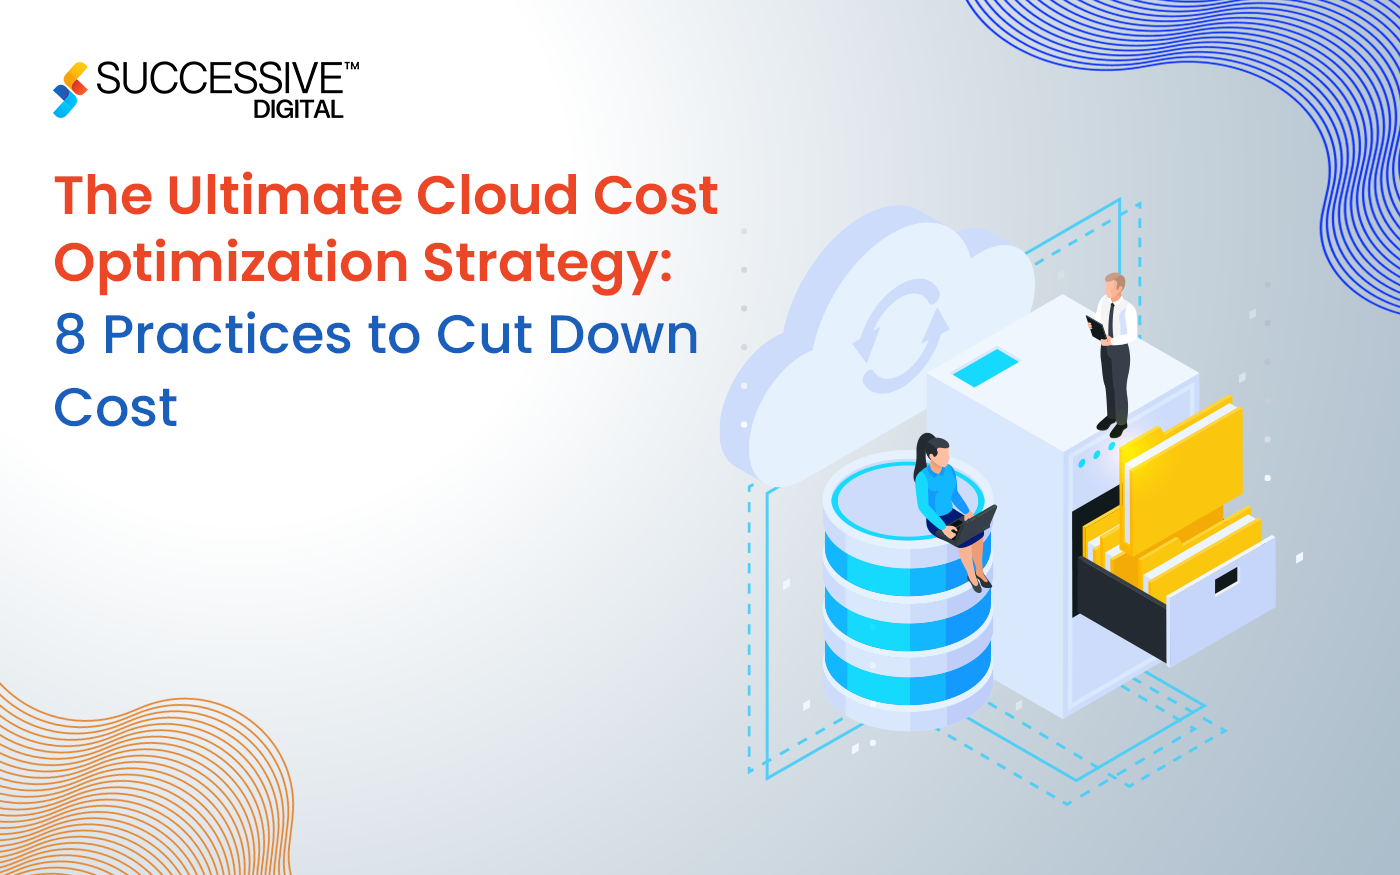 The Ultimate Cloud Cost Optimization Strategy: 8 Practices to Cut Down Cost